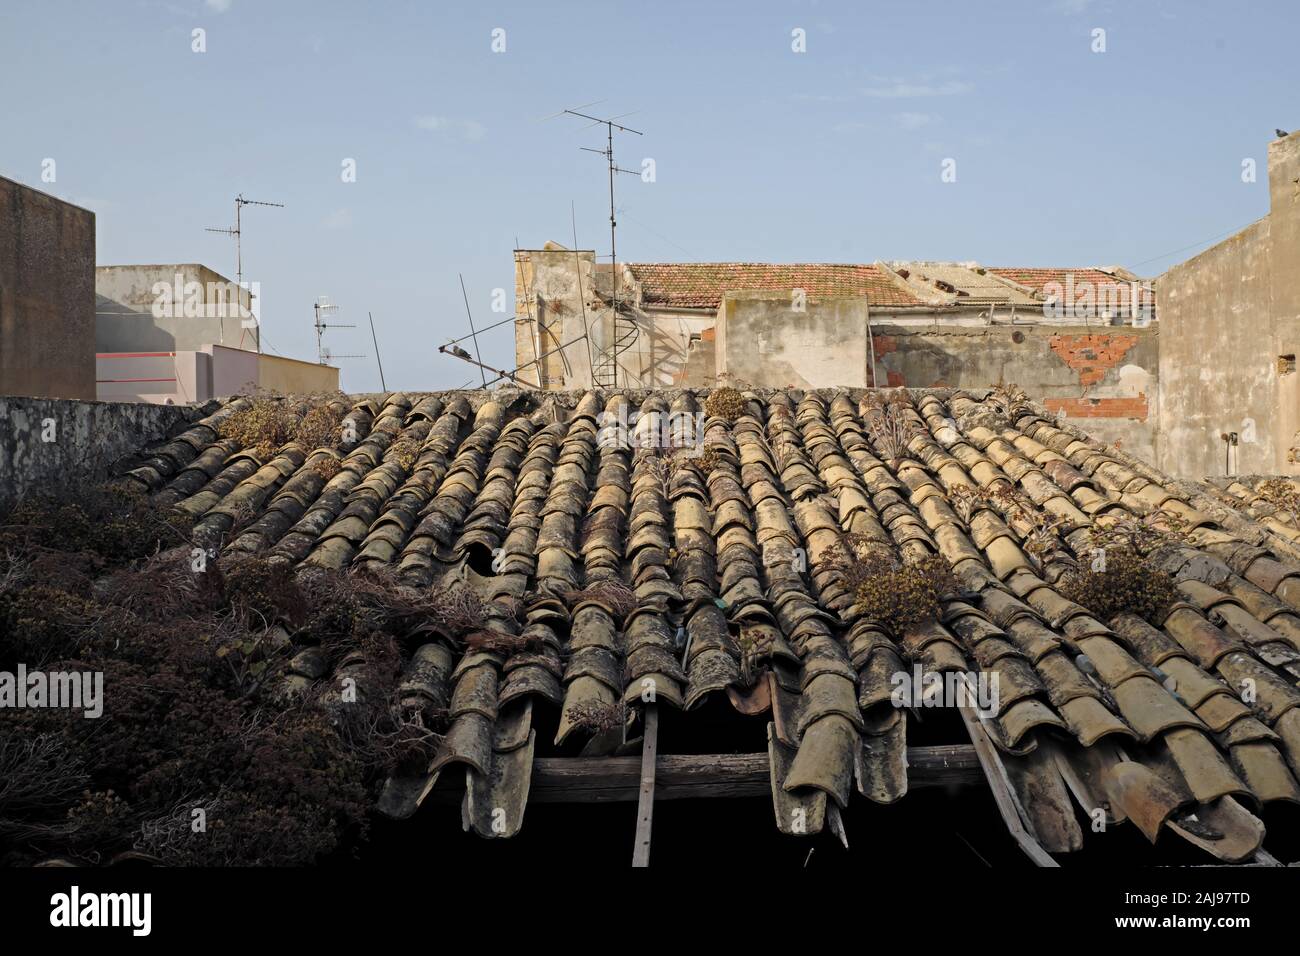 Roof clay tiles on old residential homes in Sciacca, Sicily, Italy. Stock Photo